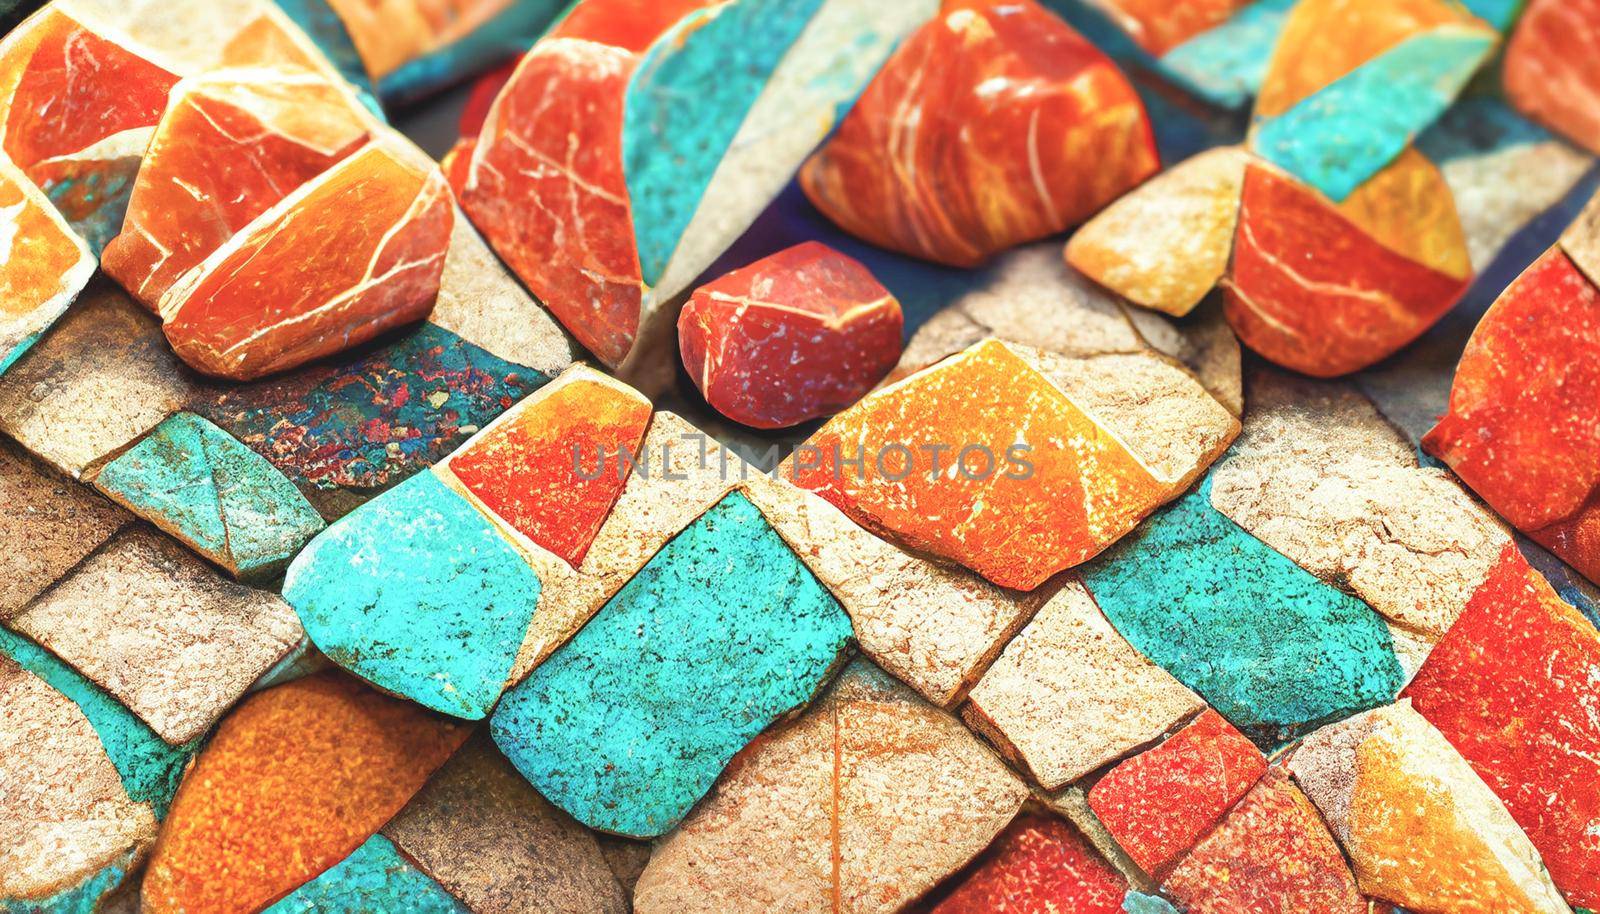 3D render abstract colorful stone texture background series design for creative wallpaper or design art work. Creativity and imagination.